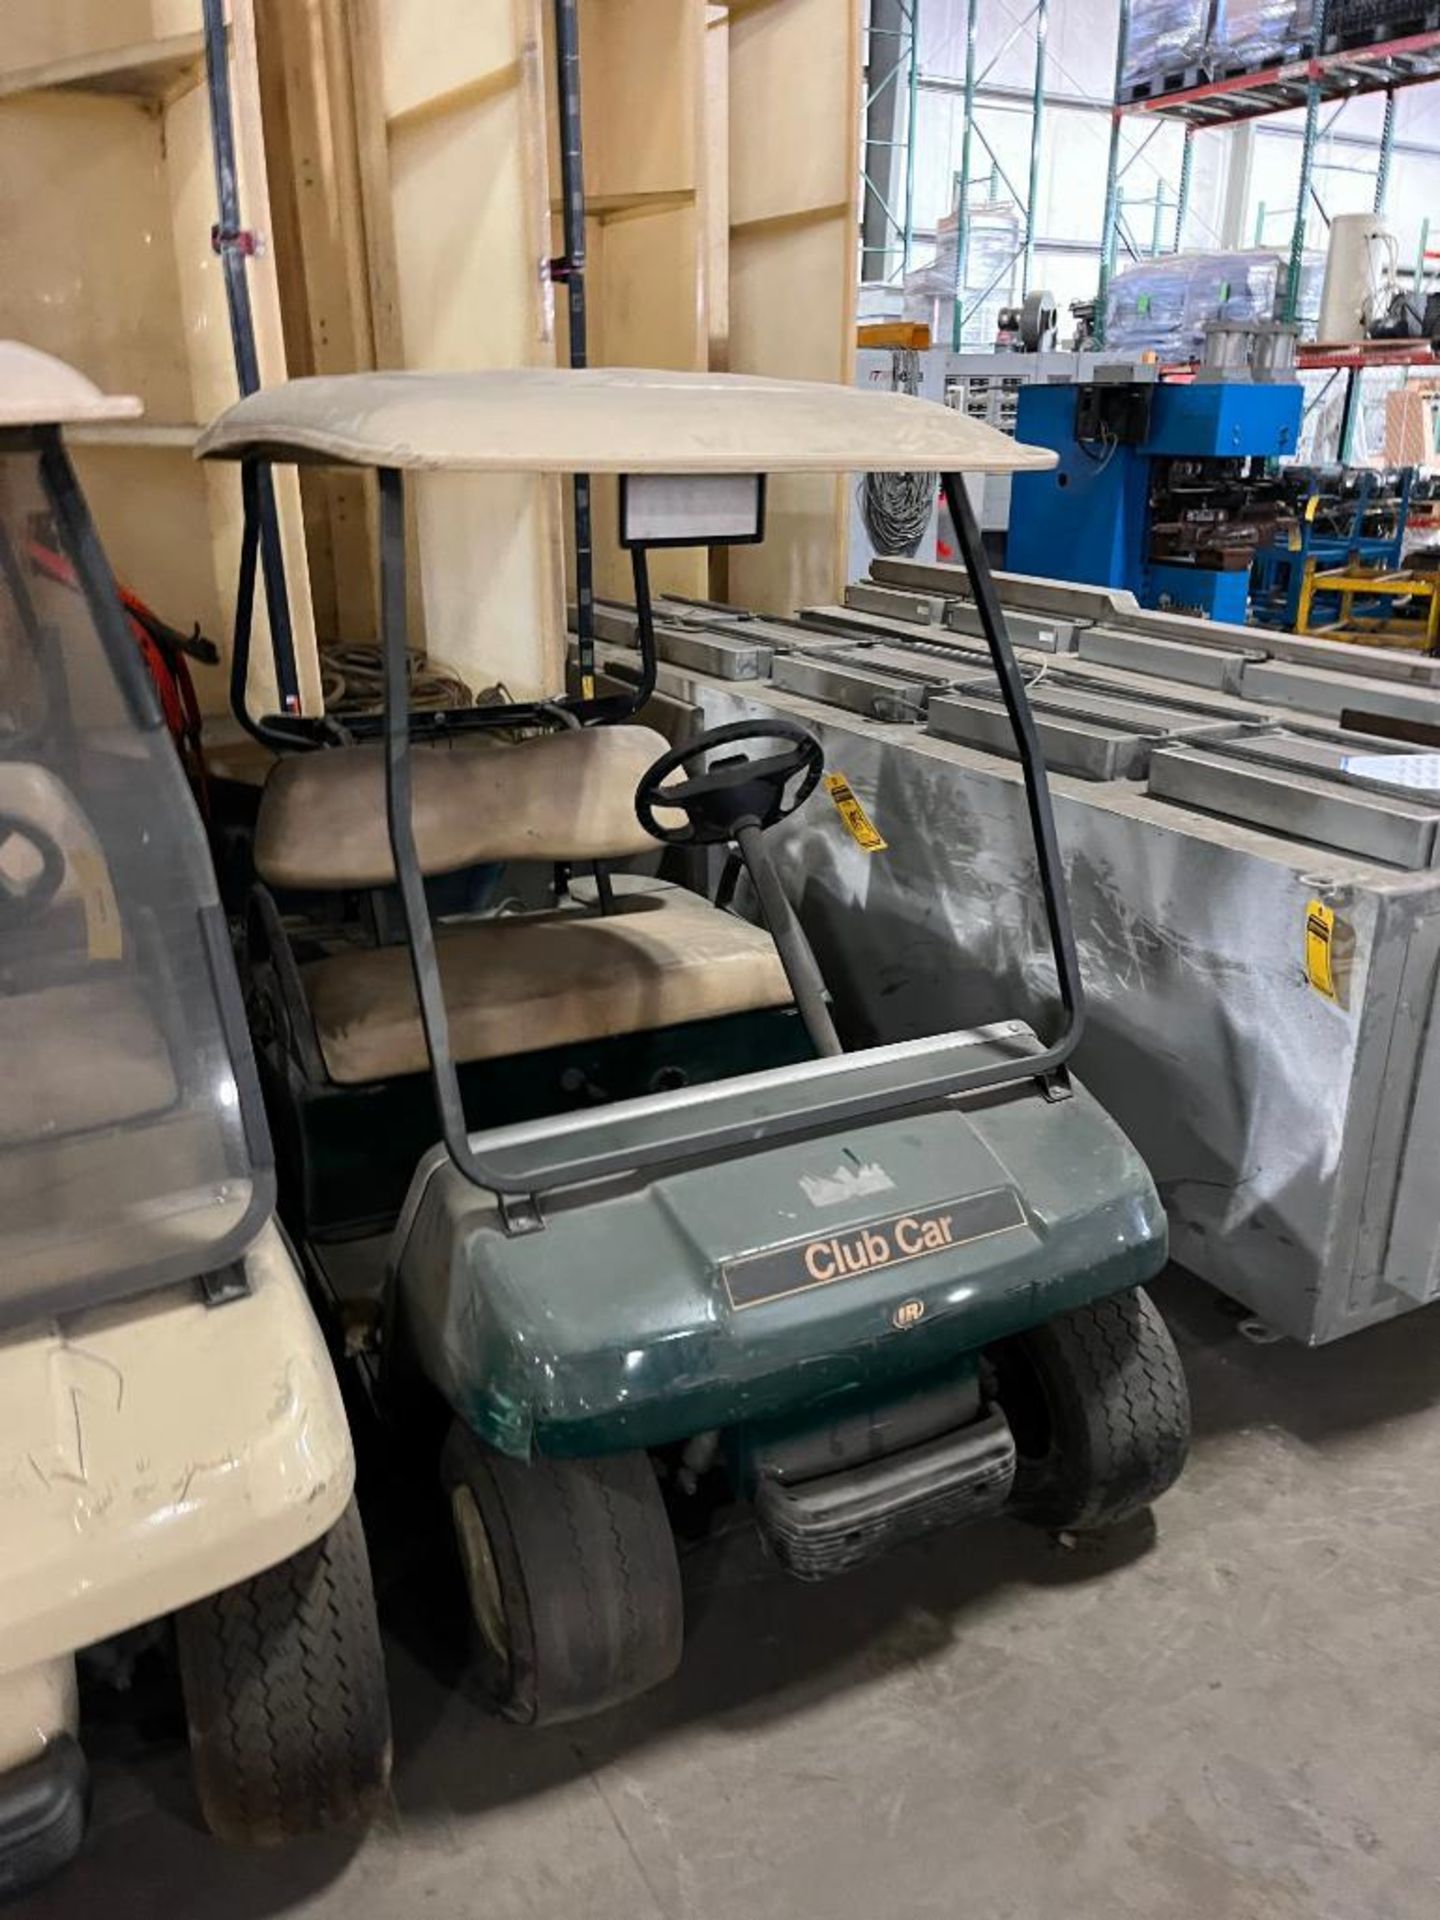 Electric Club Car Golf Cart, w/ Power Drive Pedestal Charger (Needs Batteries) - Image 2 of 2